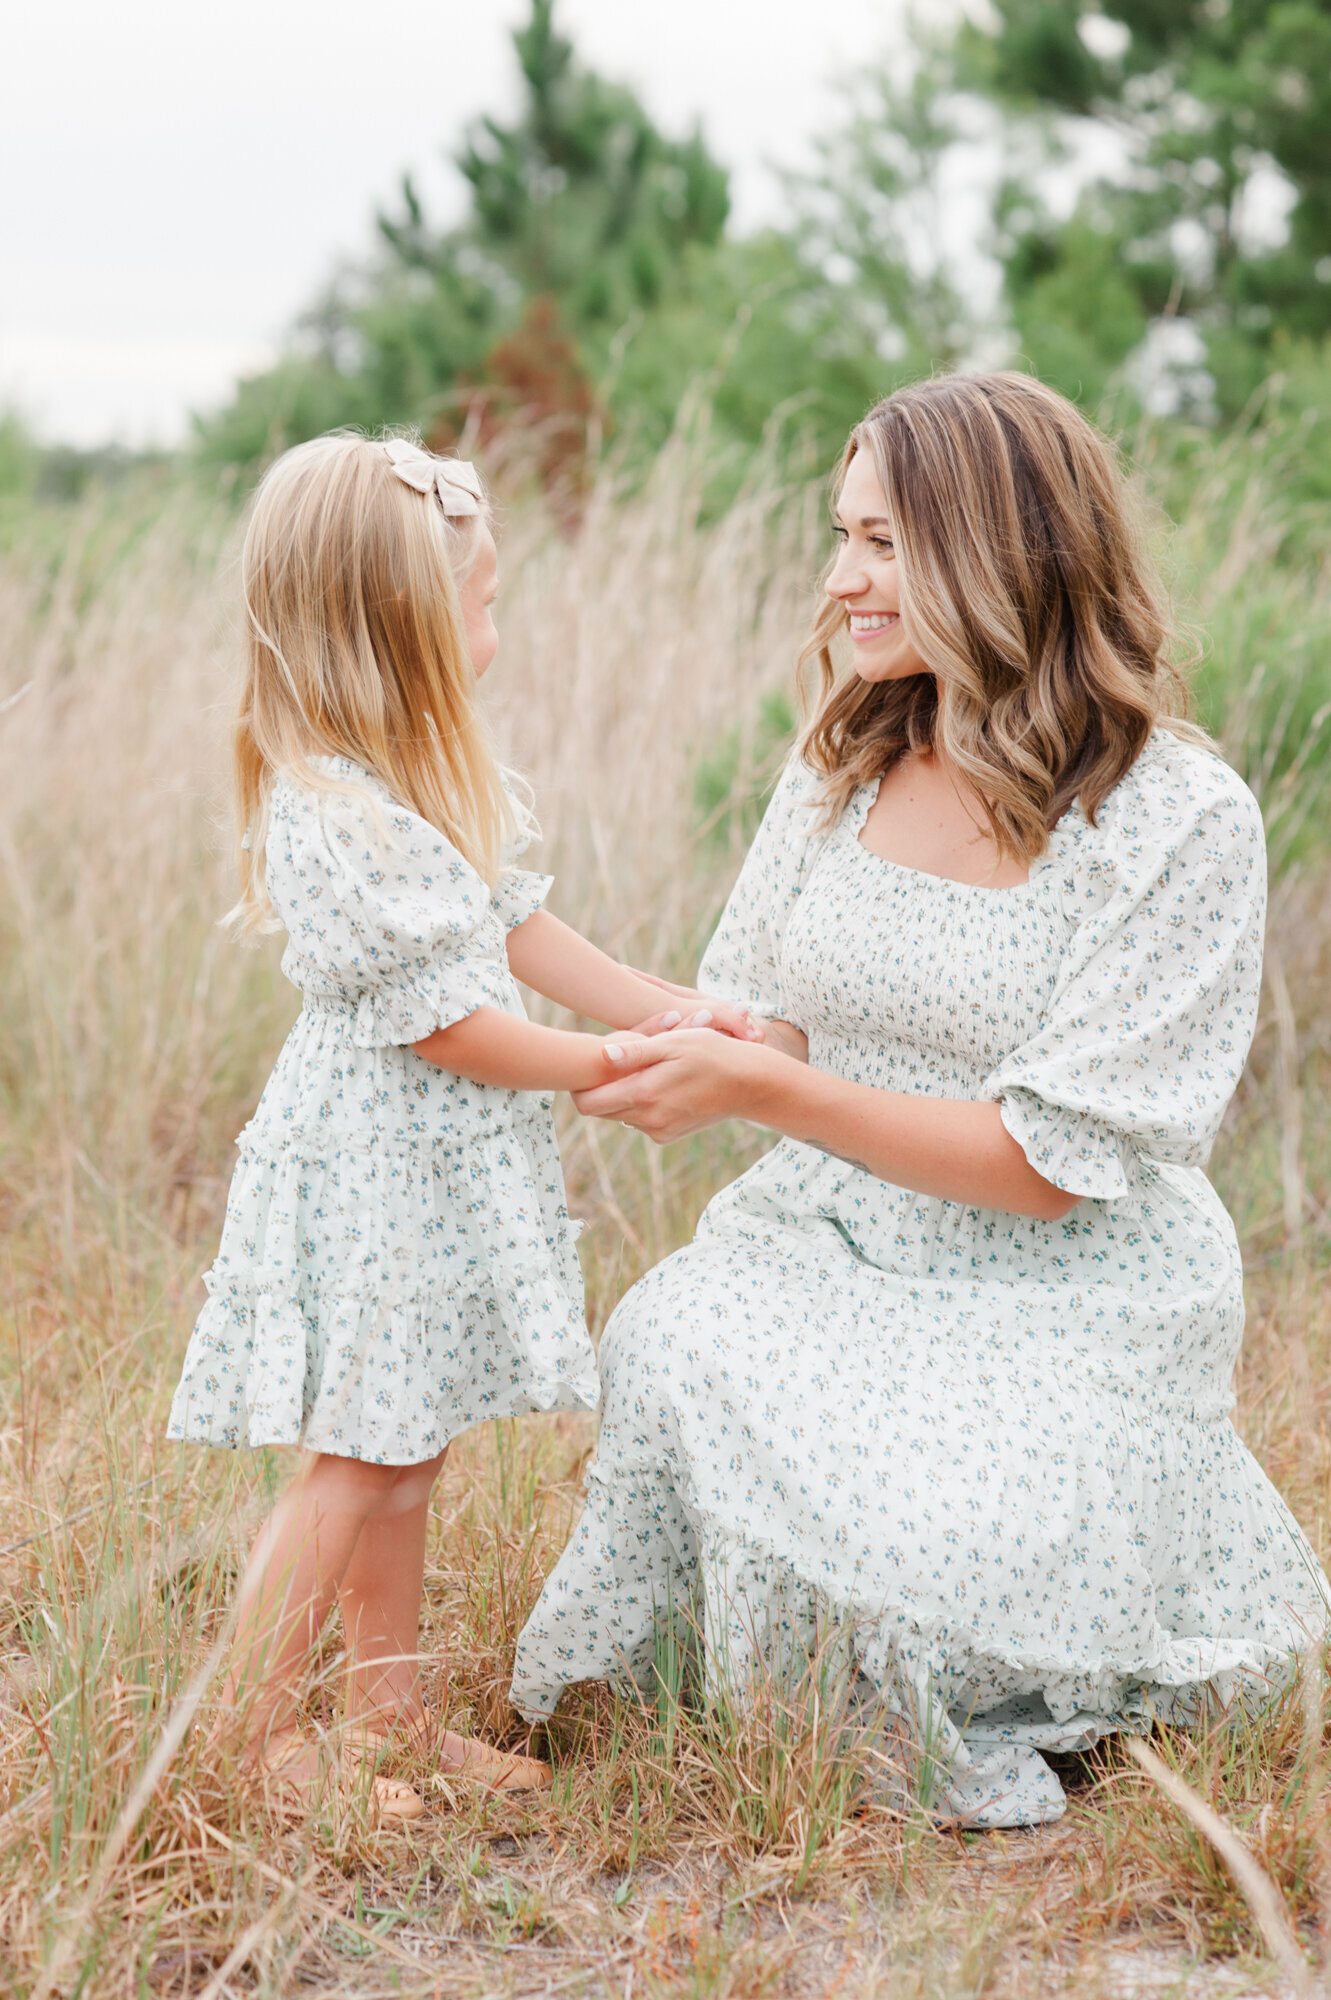 Mom and daughter in matching dresses standing in tall pampas grass holding hands